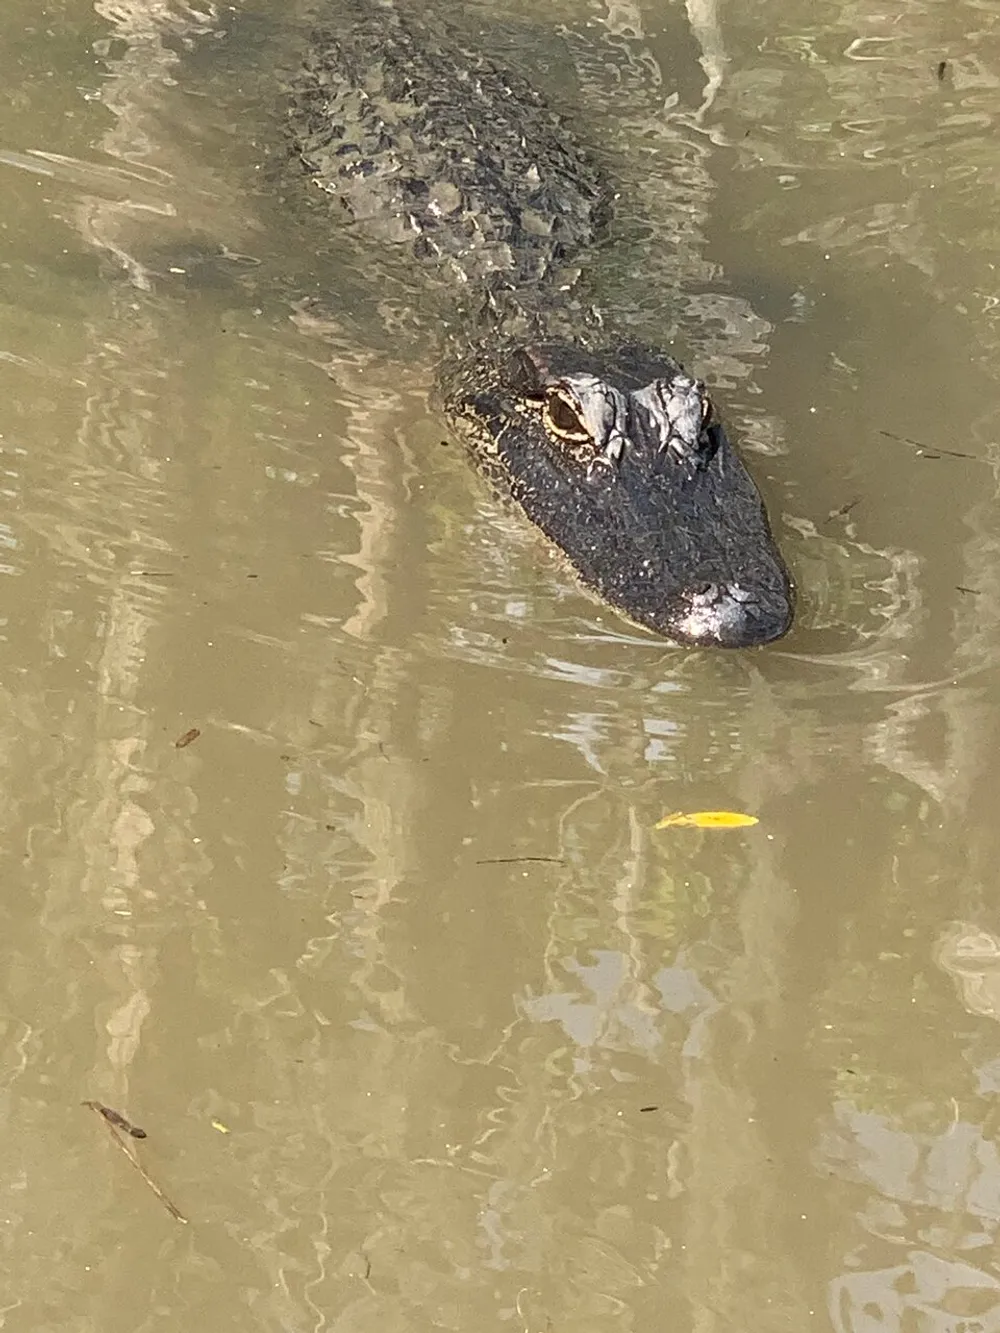 An alligator is partially submerged in murky water revealing its head and back